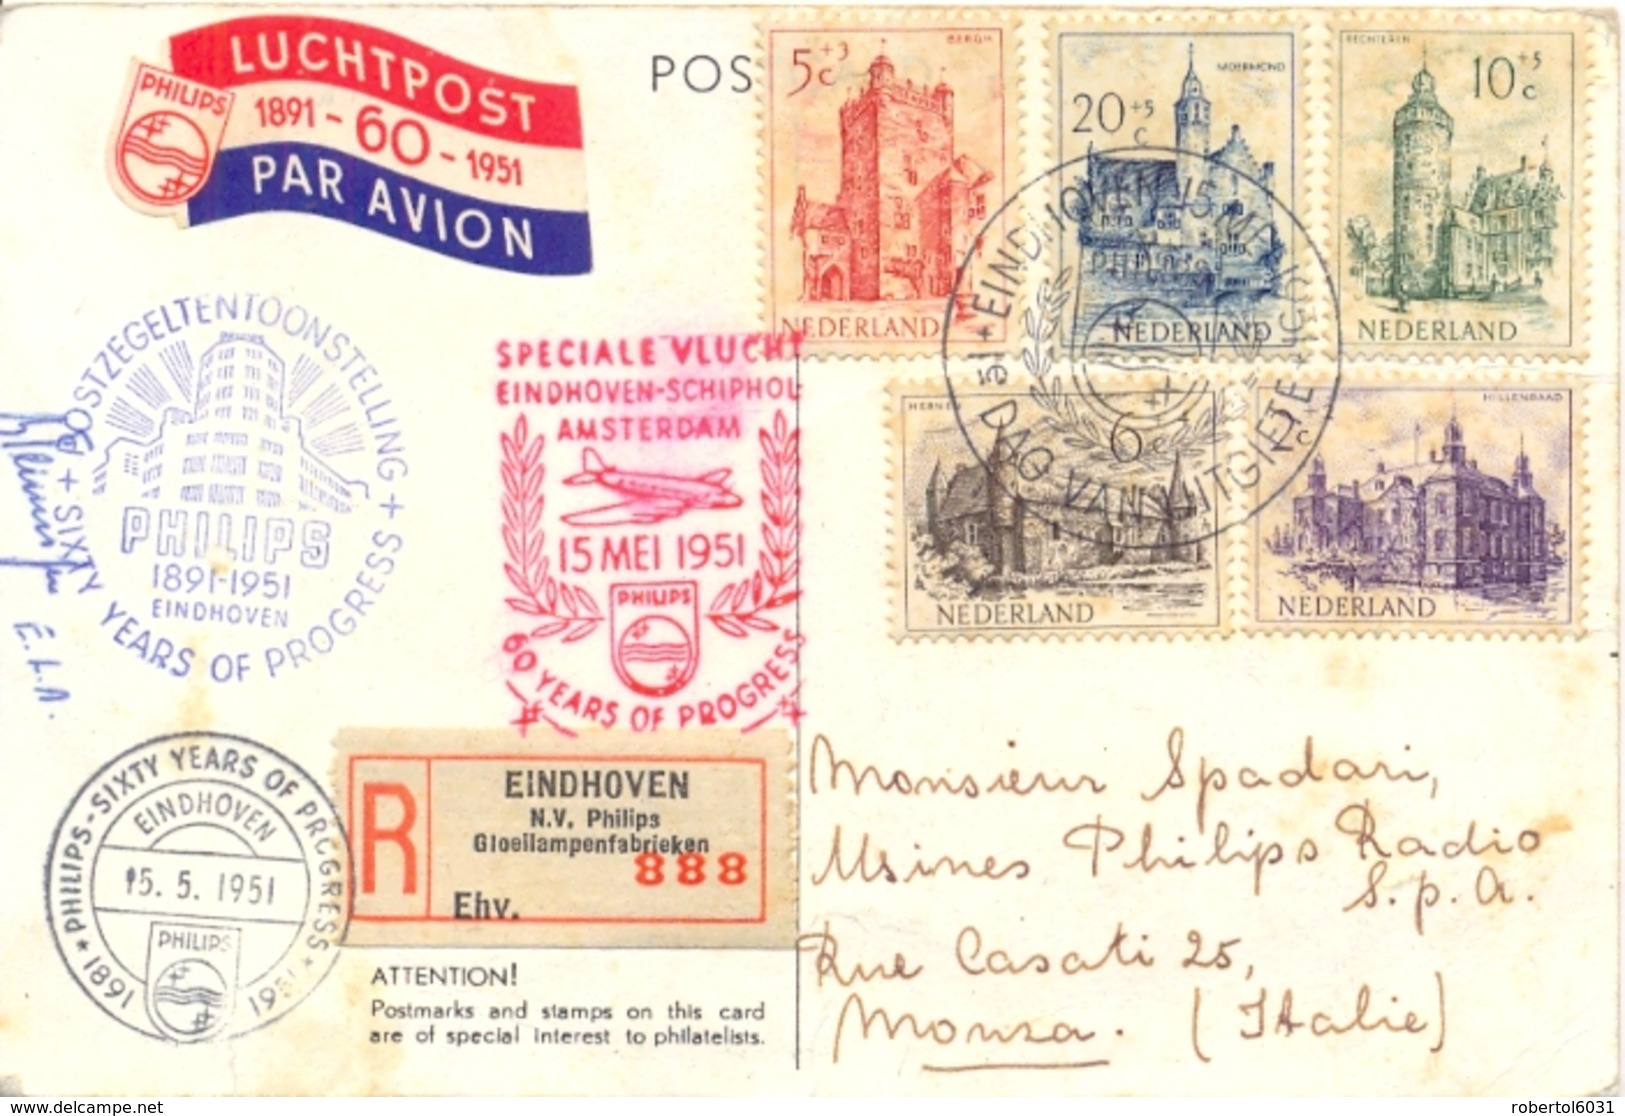 Netherlands 1951 60 Years Of Philips Picture Postcard Flown Eindhoven-Schiphol-Amsterdam By Special Flight - Airmail